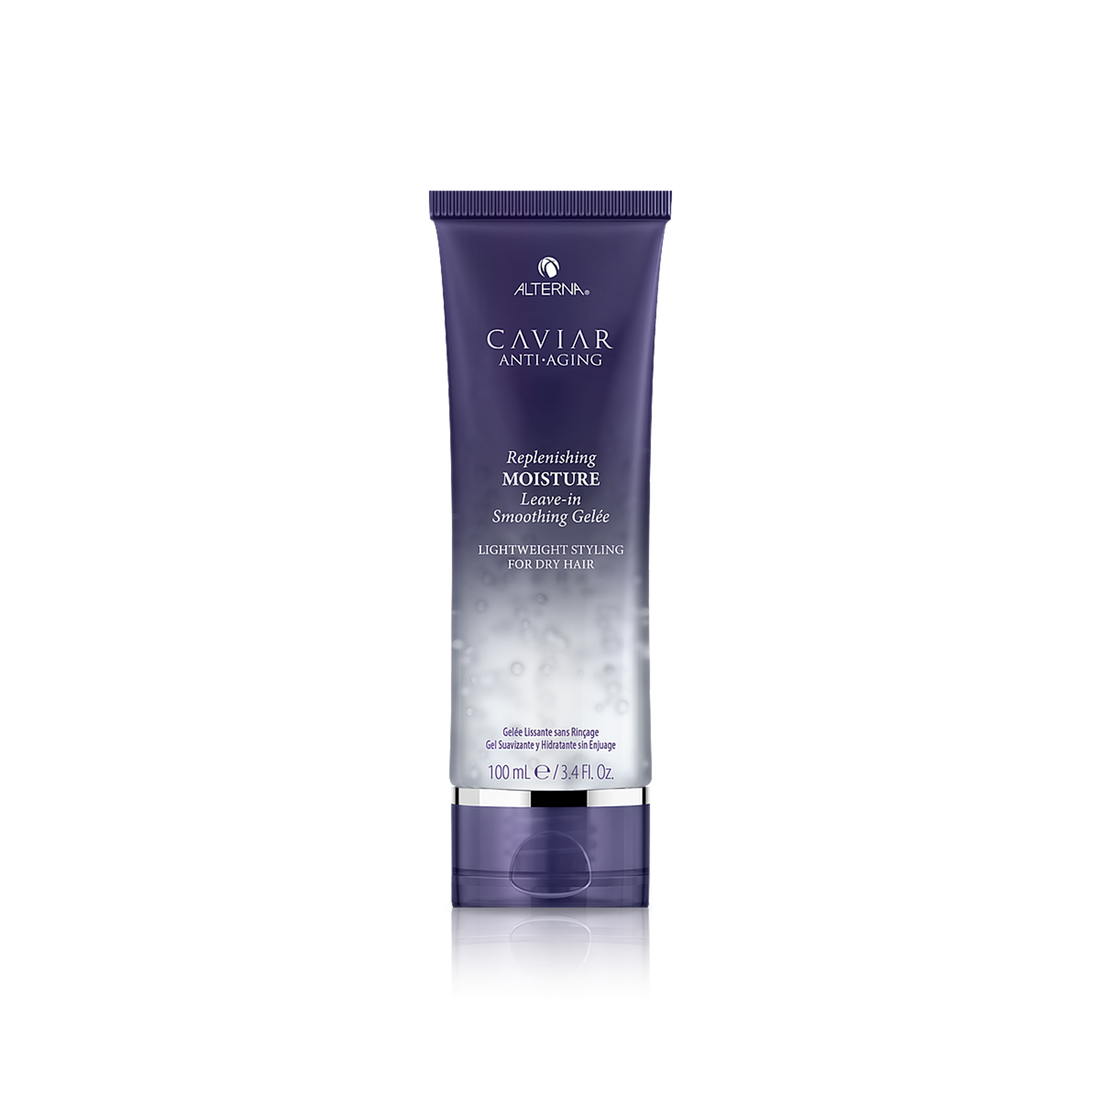 Caviar Anti-Aging Replenishing Moisture Leave-In Smoothing Gelée